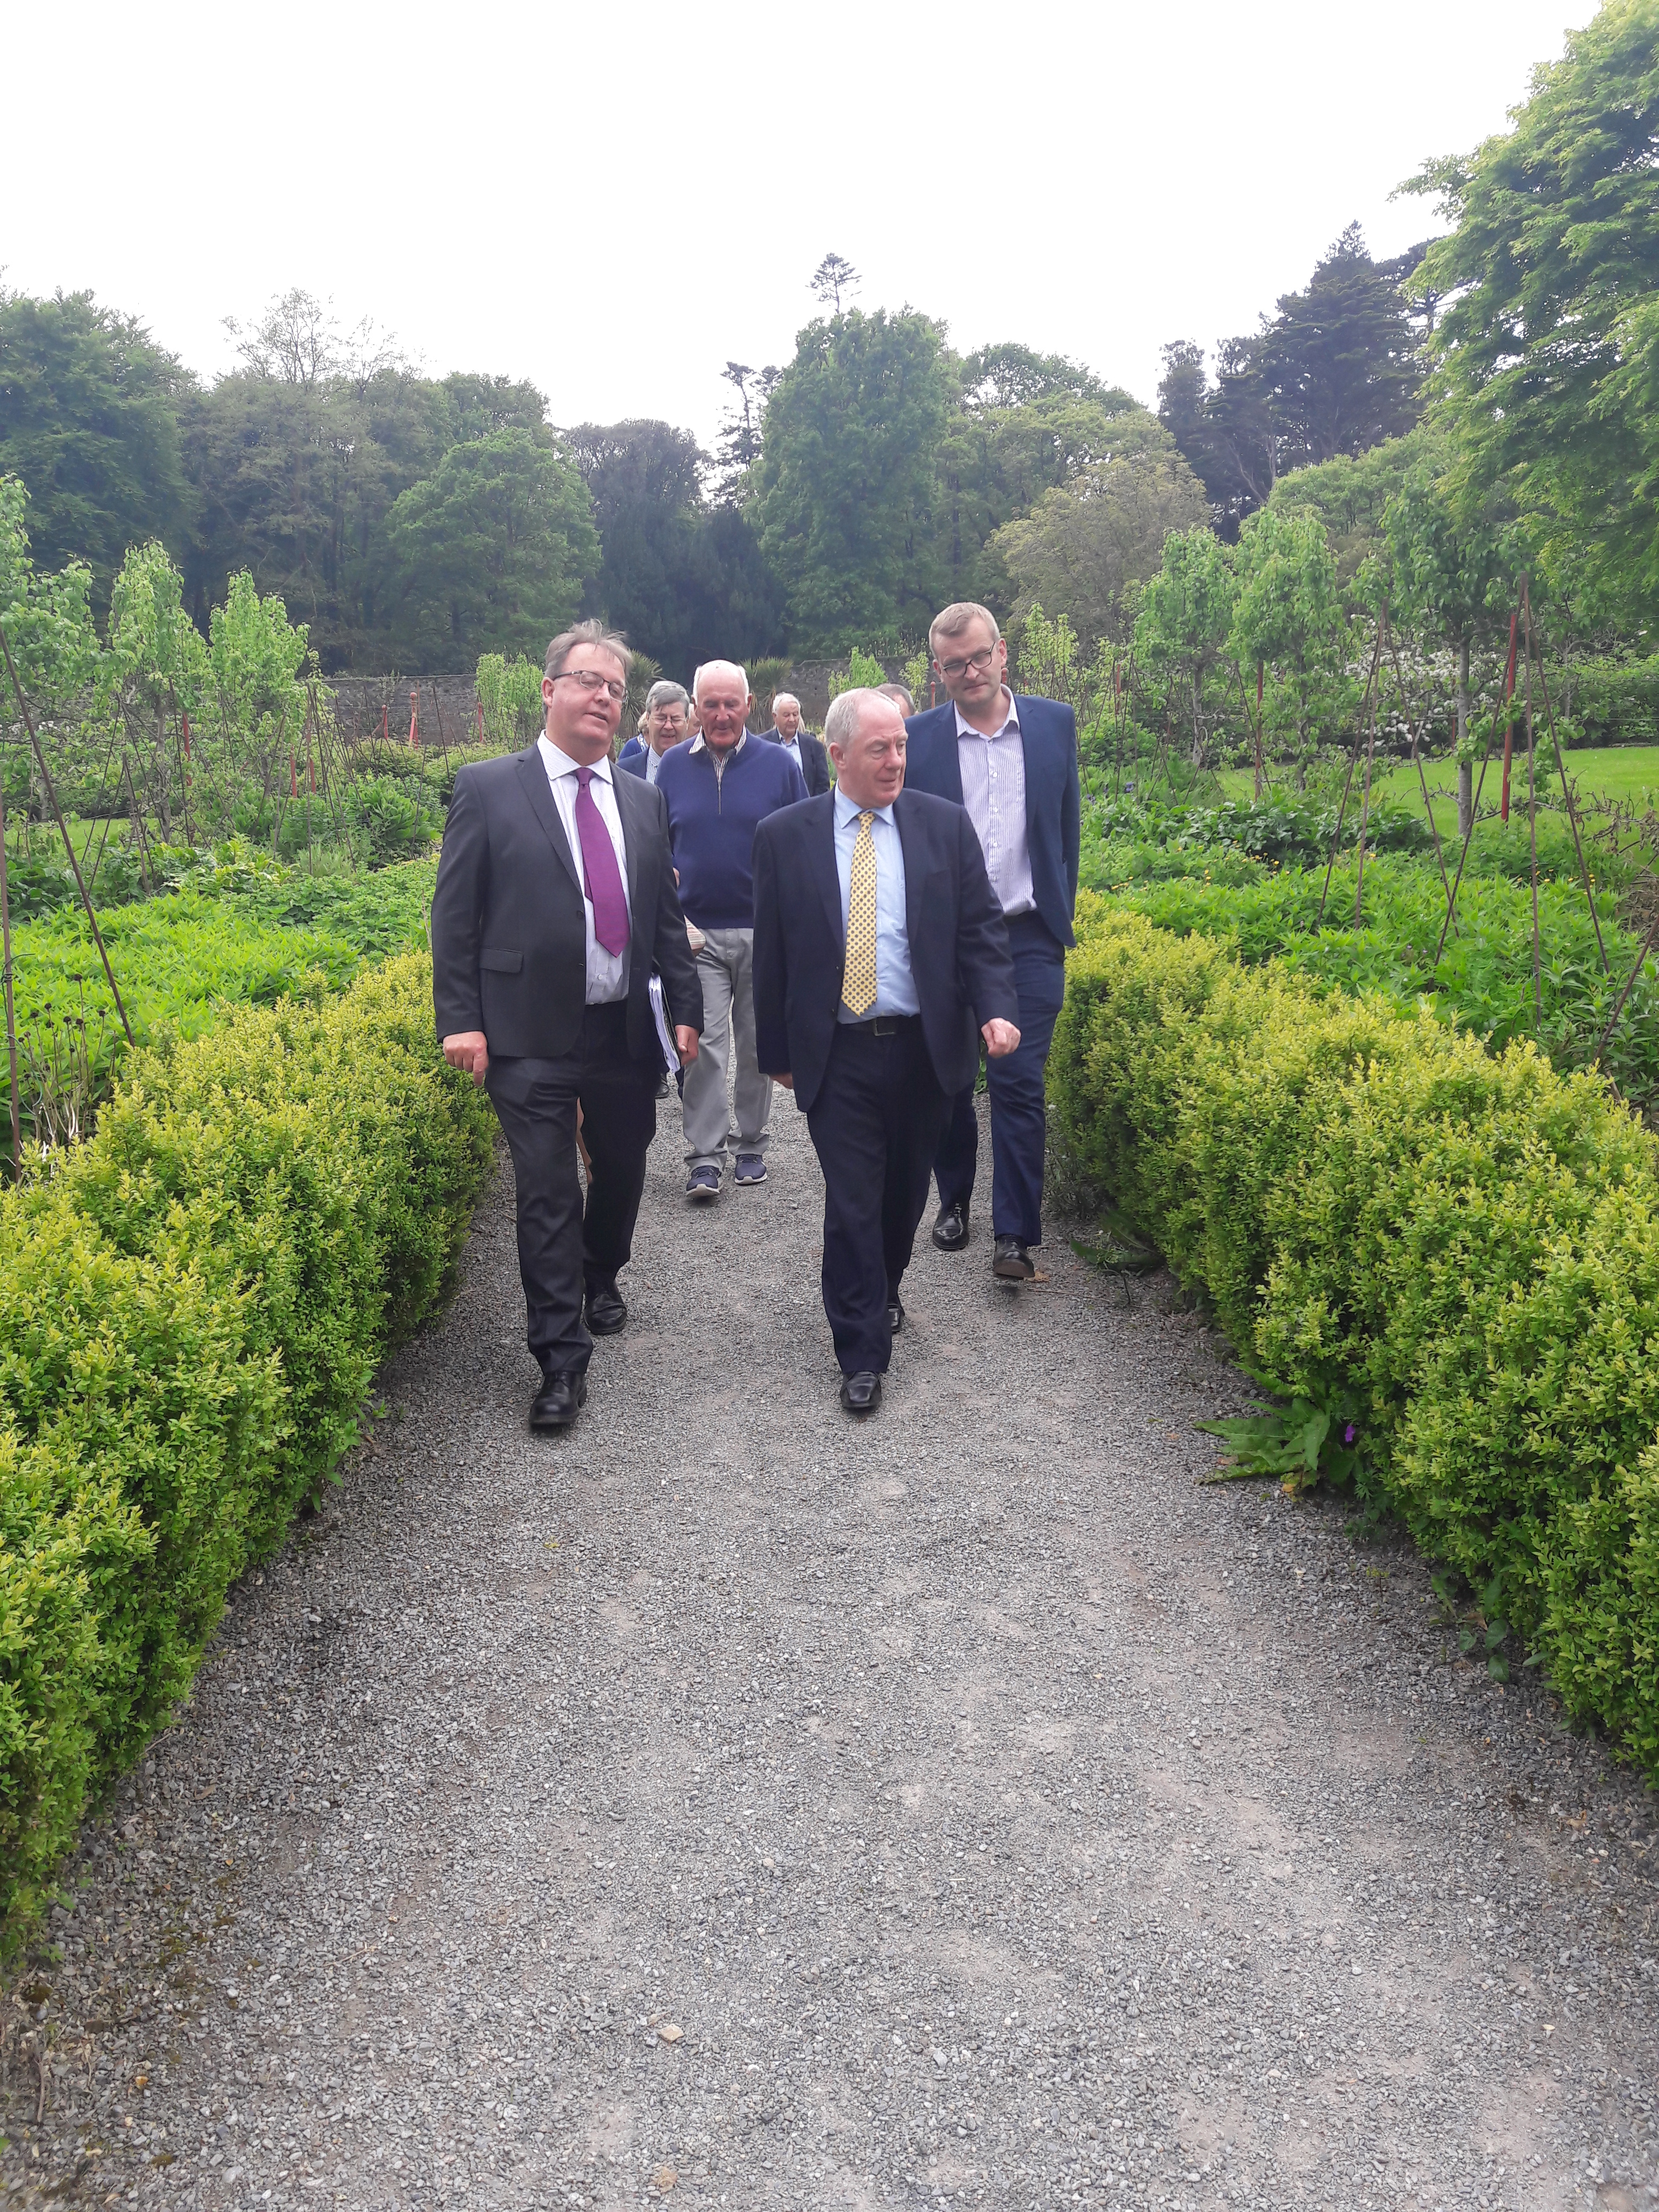 Minister Ring being given a tour of Woodstock Gardens